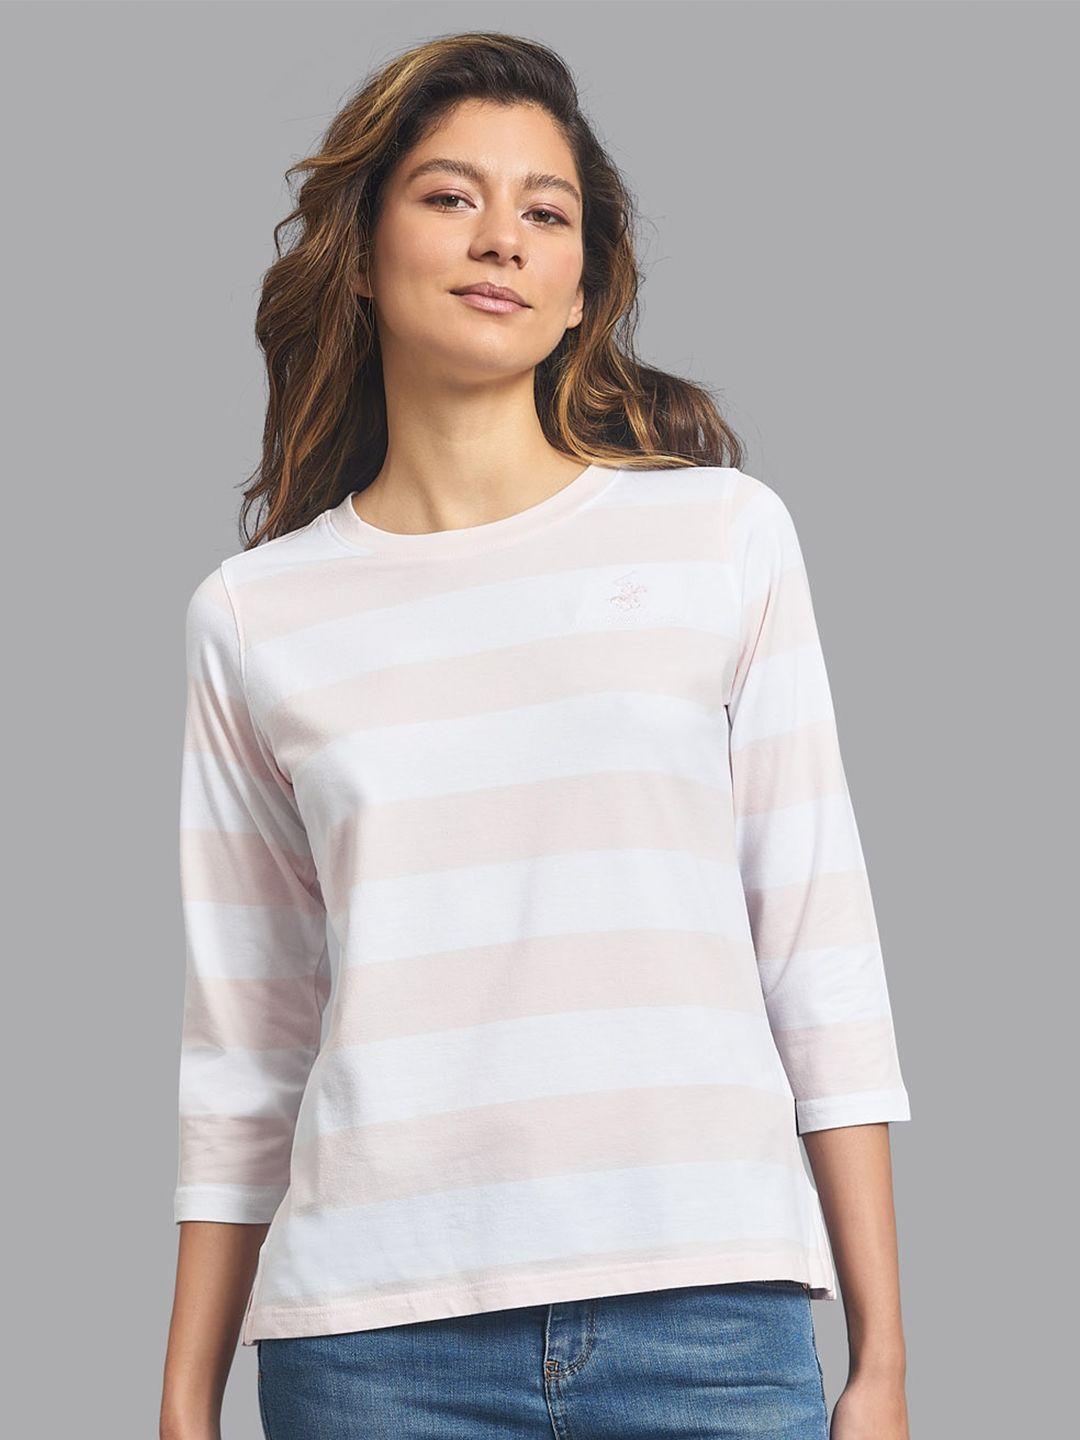 beverly-hills-polo-club-women-multicoloured-striped-t-shirt